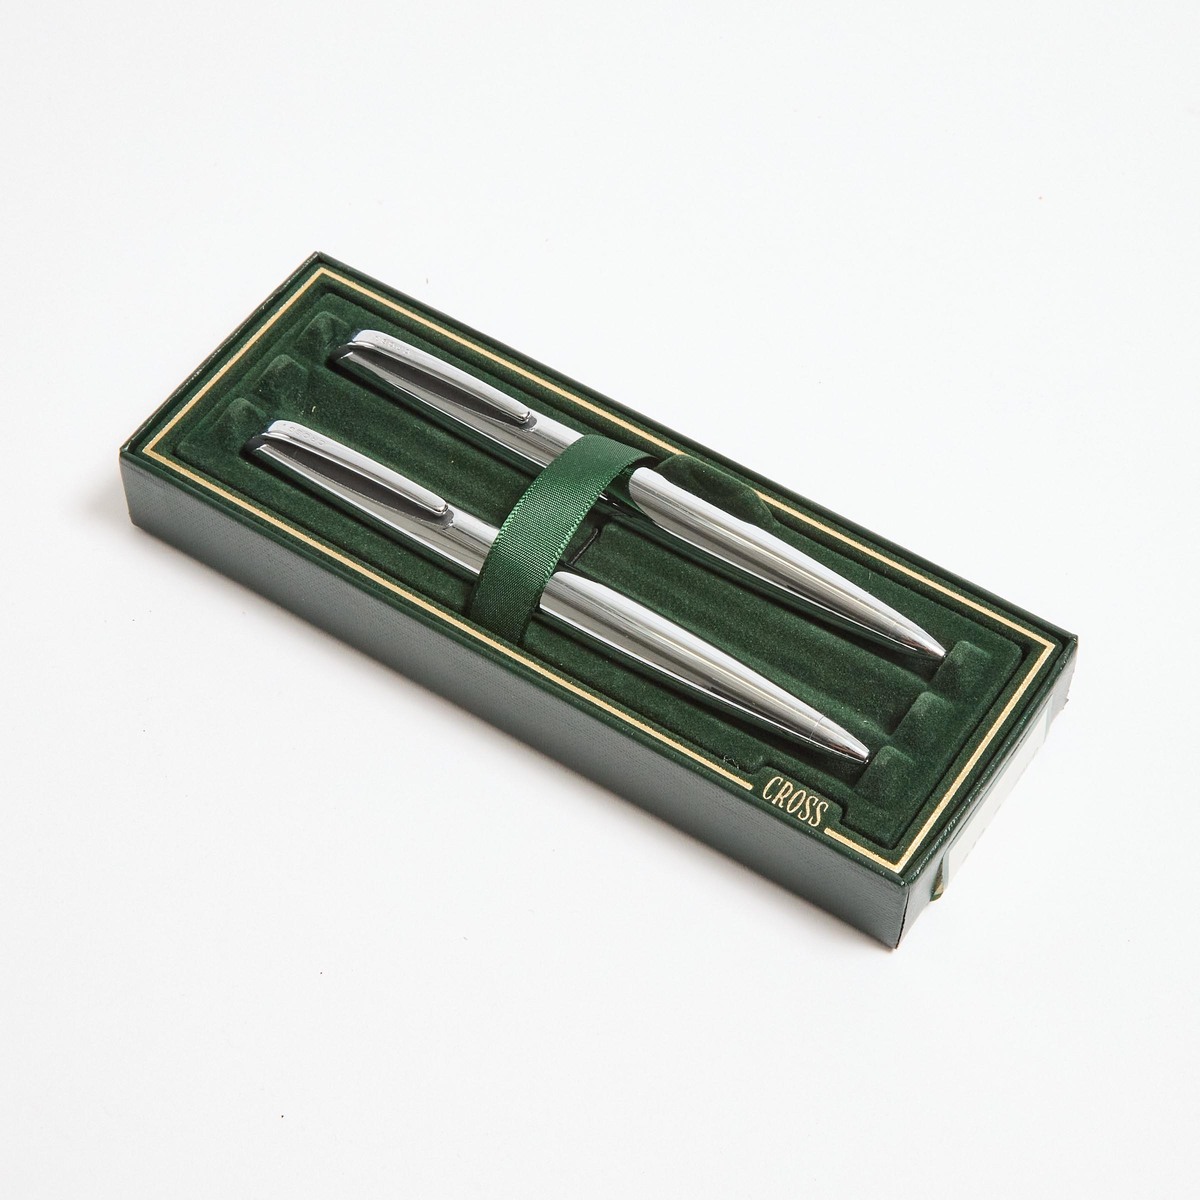 Cross Ballpoint Pen And Mechanical Pencil Set, in chrome steel bodies; in the original box